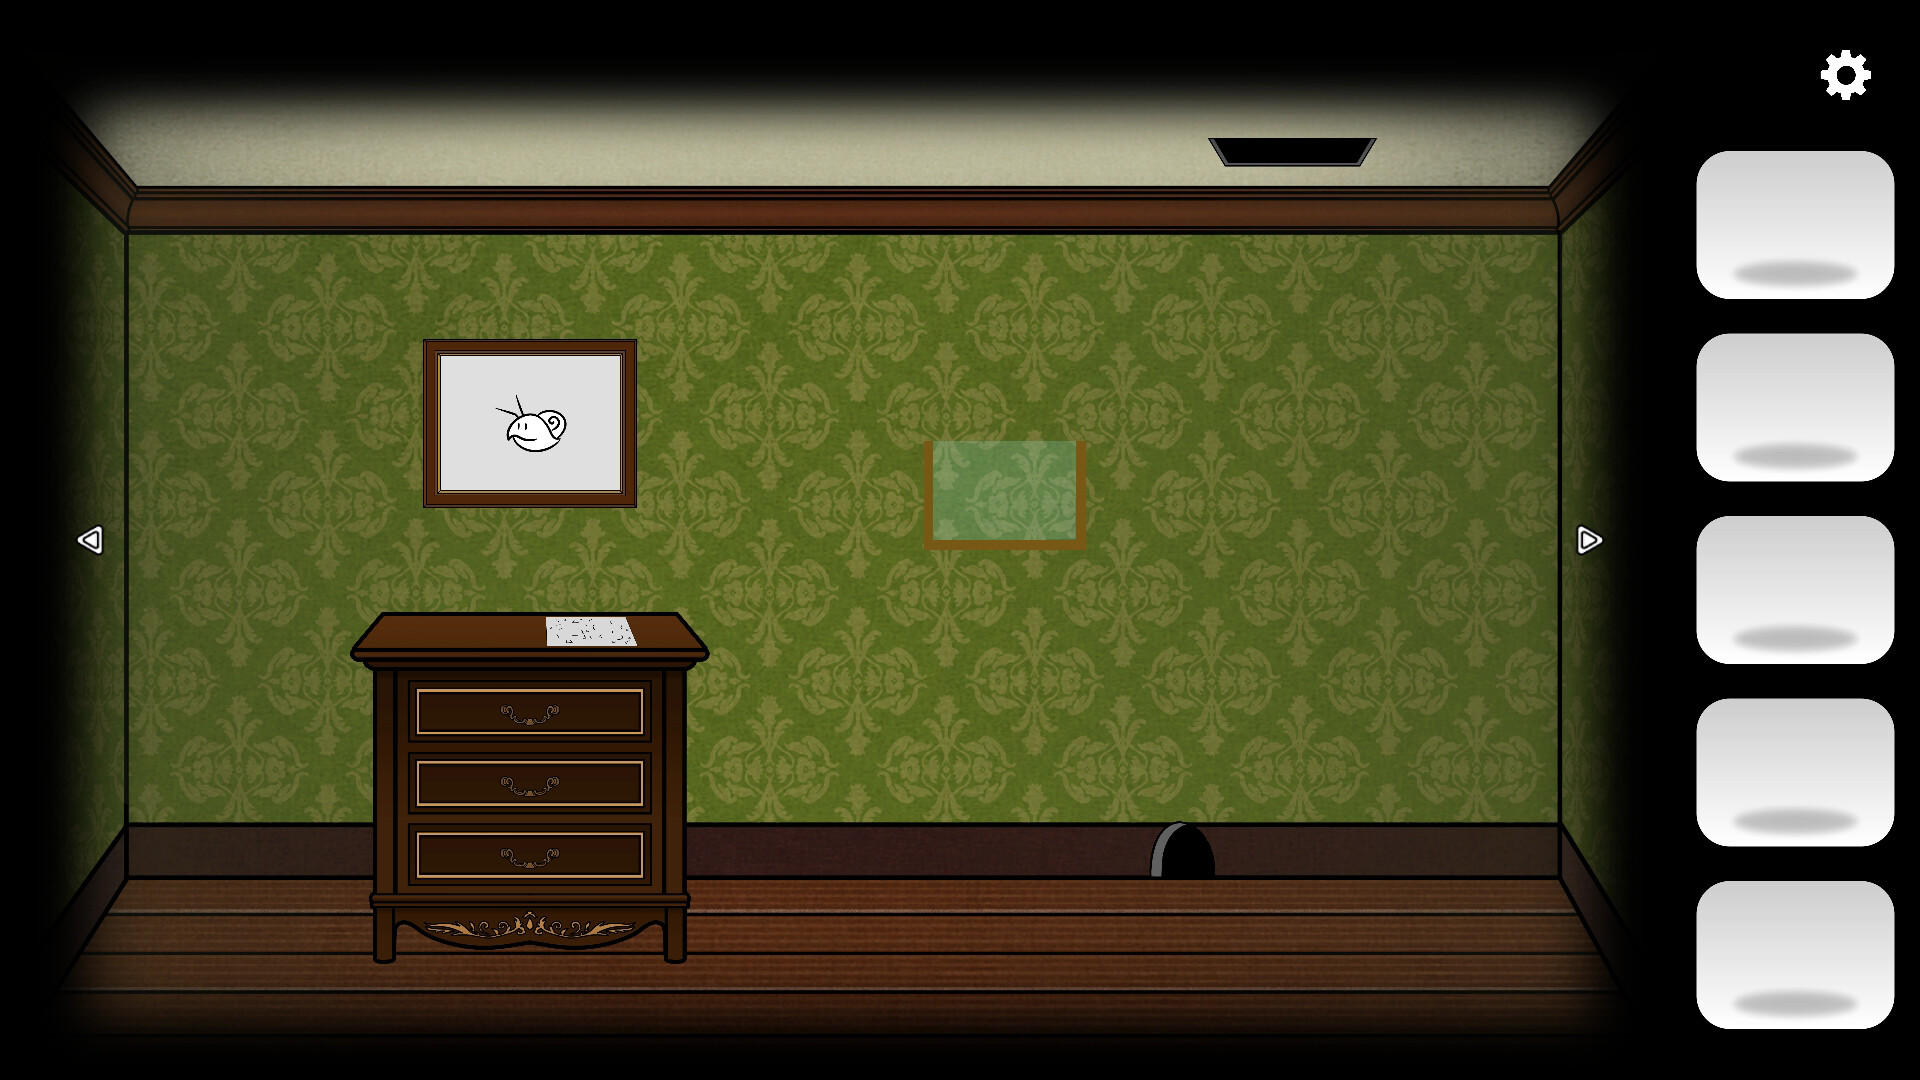 Screenshot of The Paradixion: Son's Room